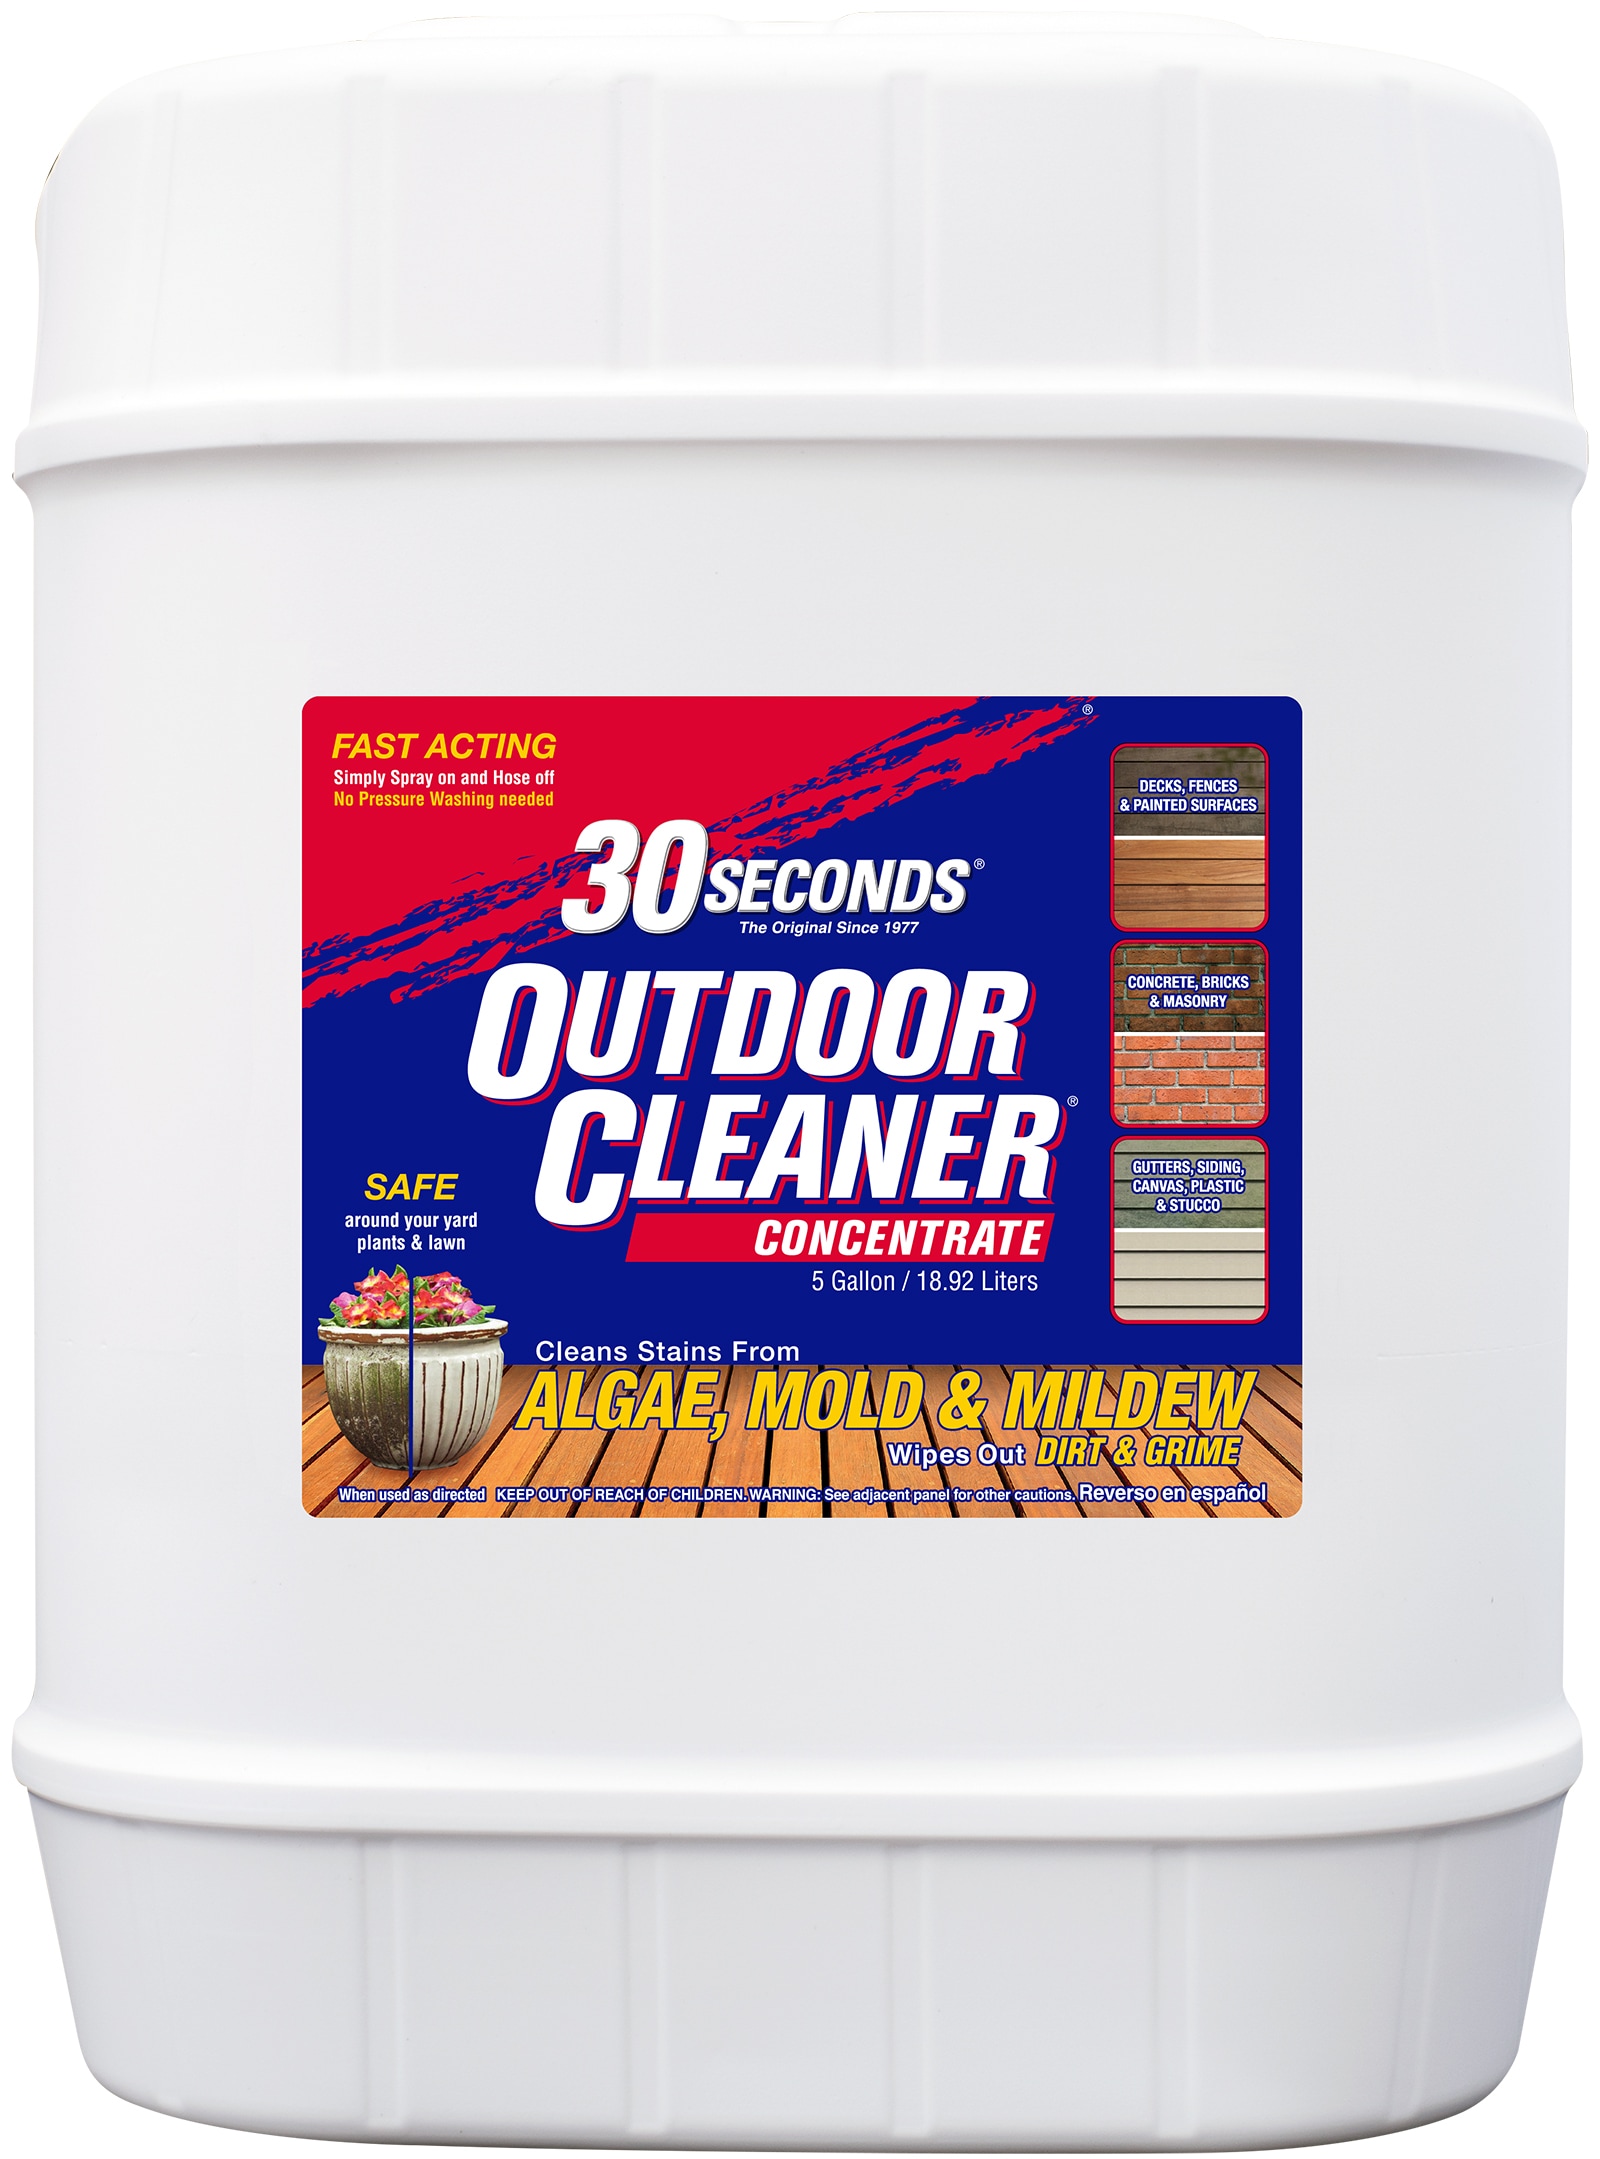 30 SECONDS 64-oz Mold and Mildew Stain Remover Outdoor Cleaner